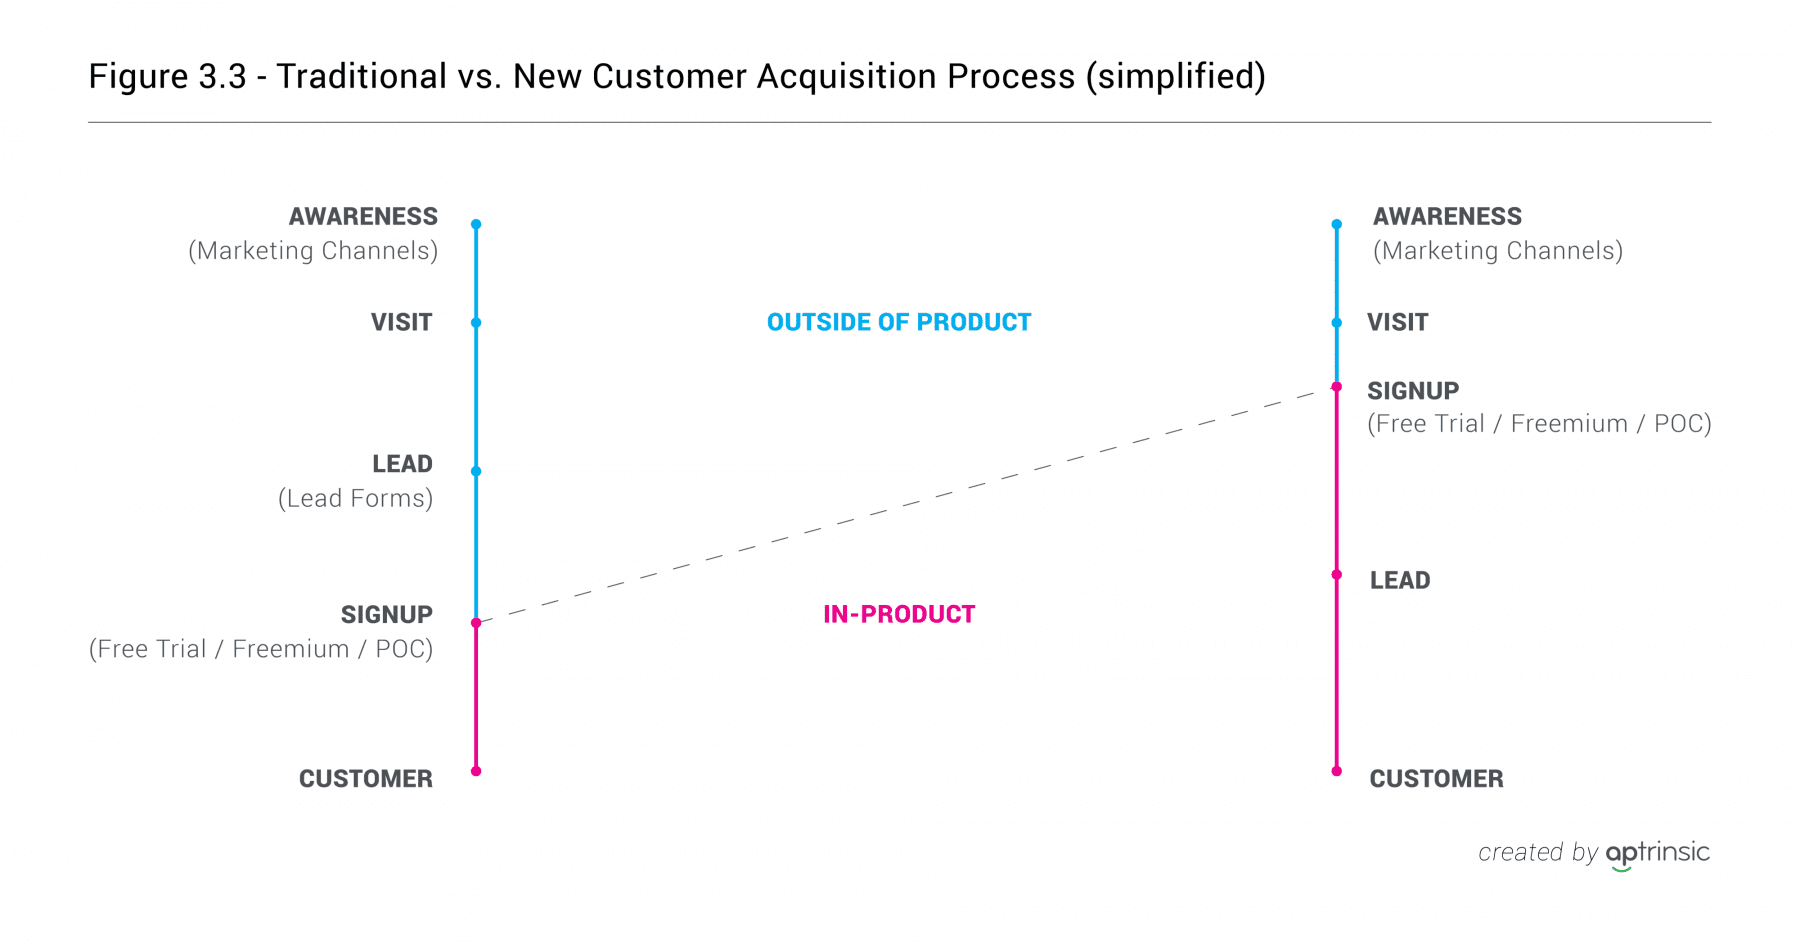 Change in customer acquisition model